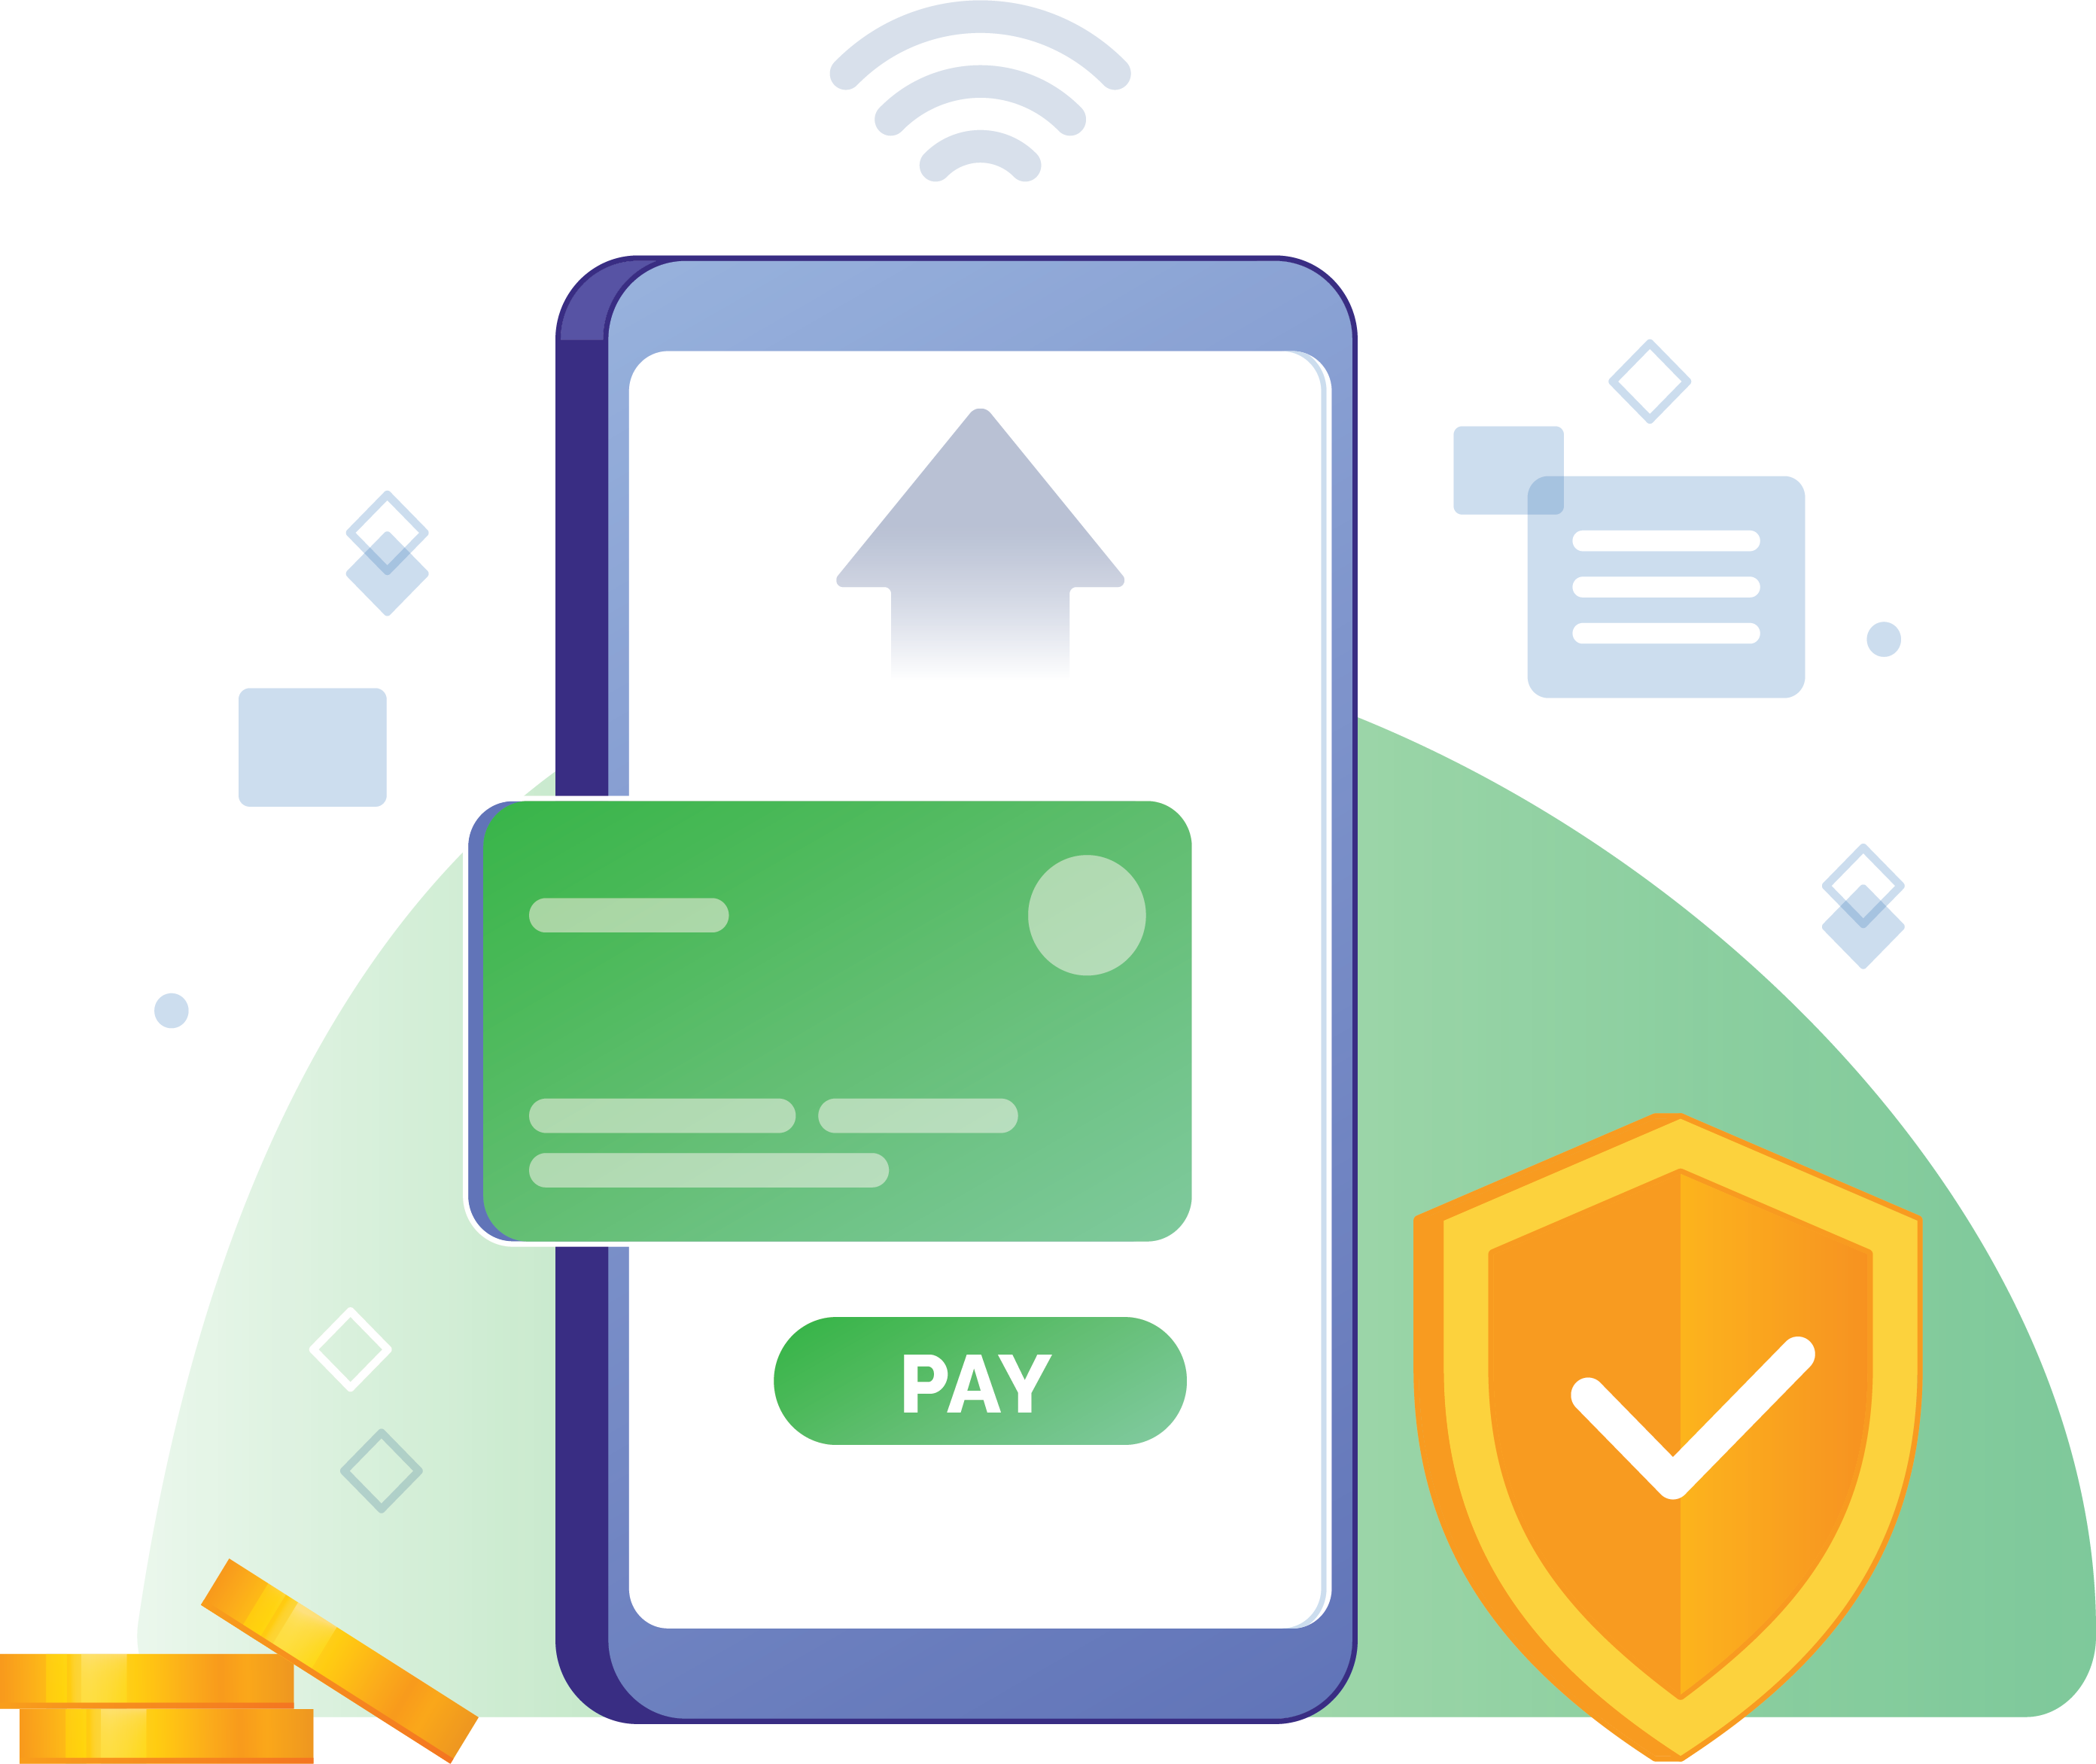 How Digital Identity Can Improve Consumer Consent in the Payments Industry